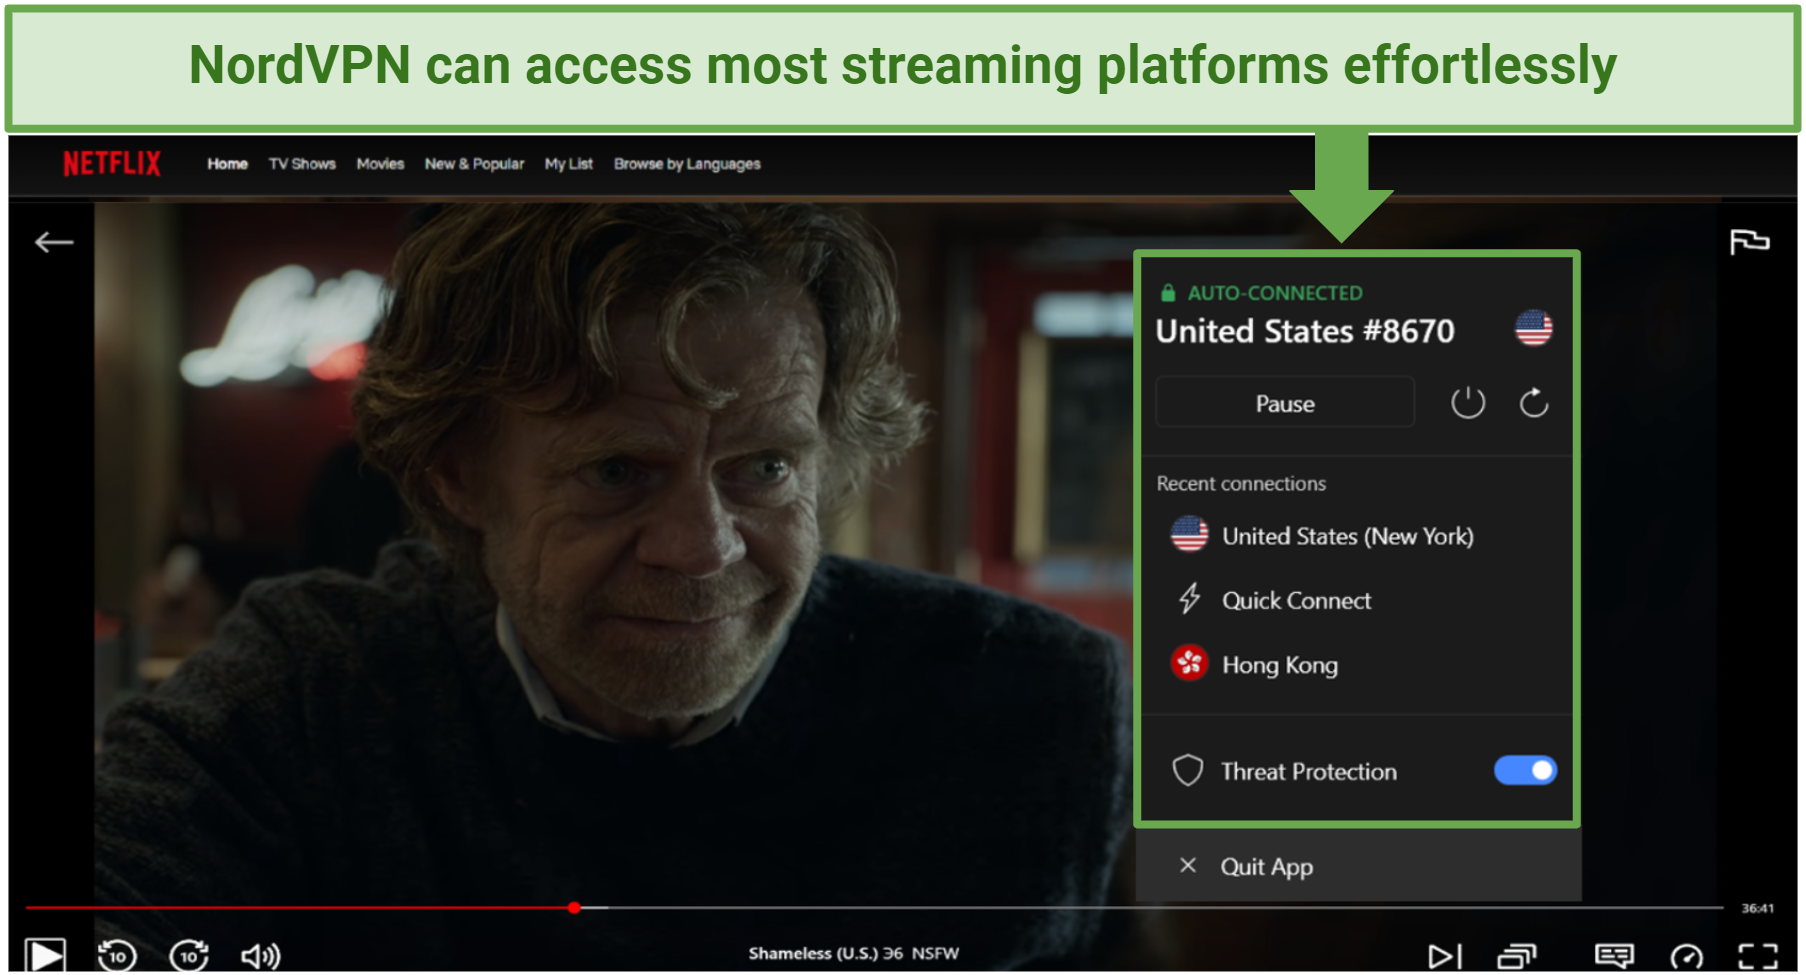 Picture of Shameless US streaming on Netflix while connected to a NordVPN US server